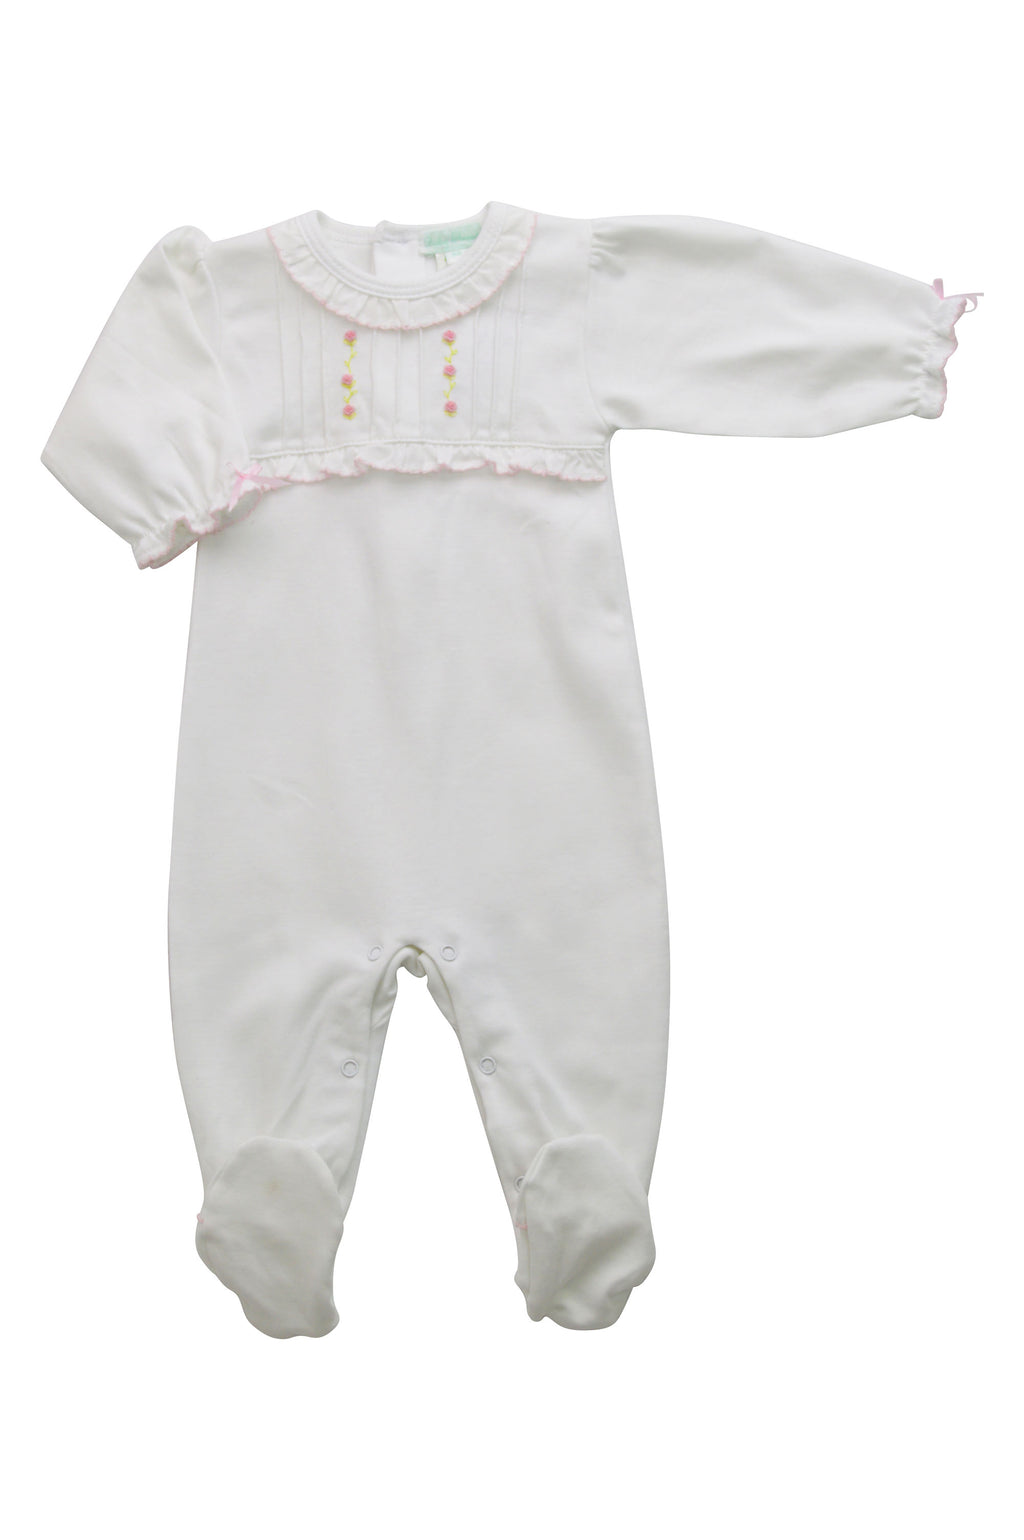 Baby Girl's White Pink Fowers Footie - Little Threads Inc. Children's Clothing